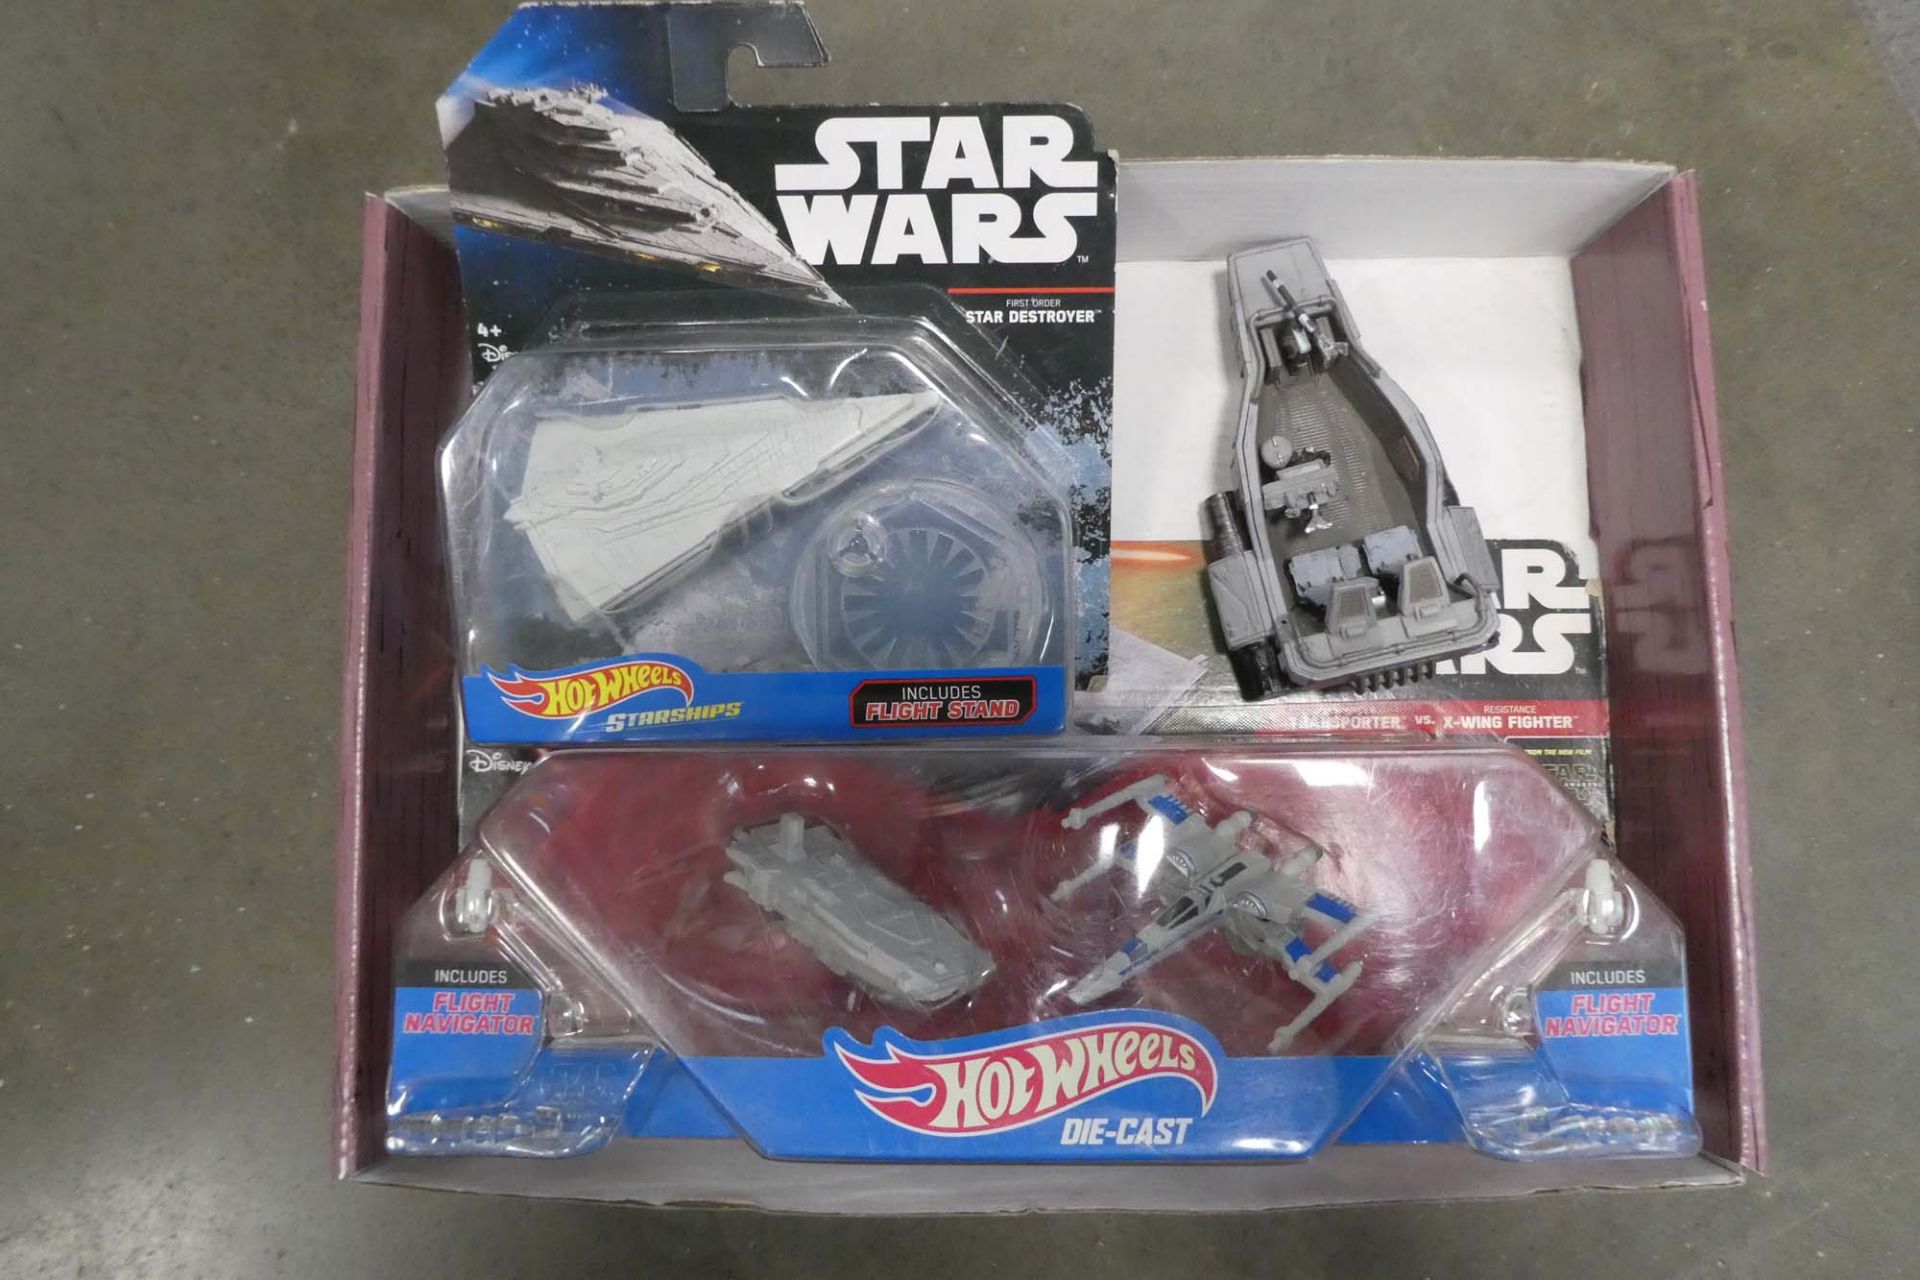 Selection of Star Wars die cast collectible vehicles in tray